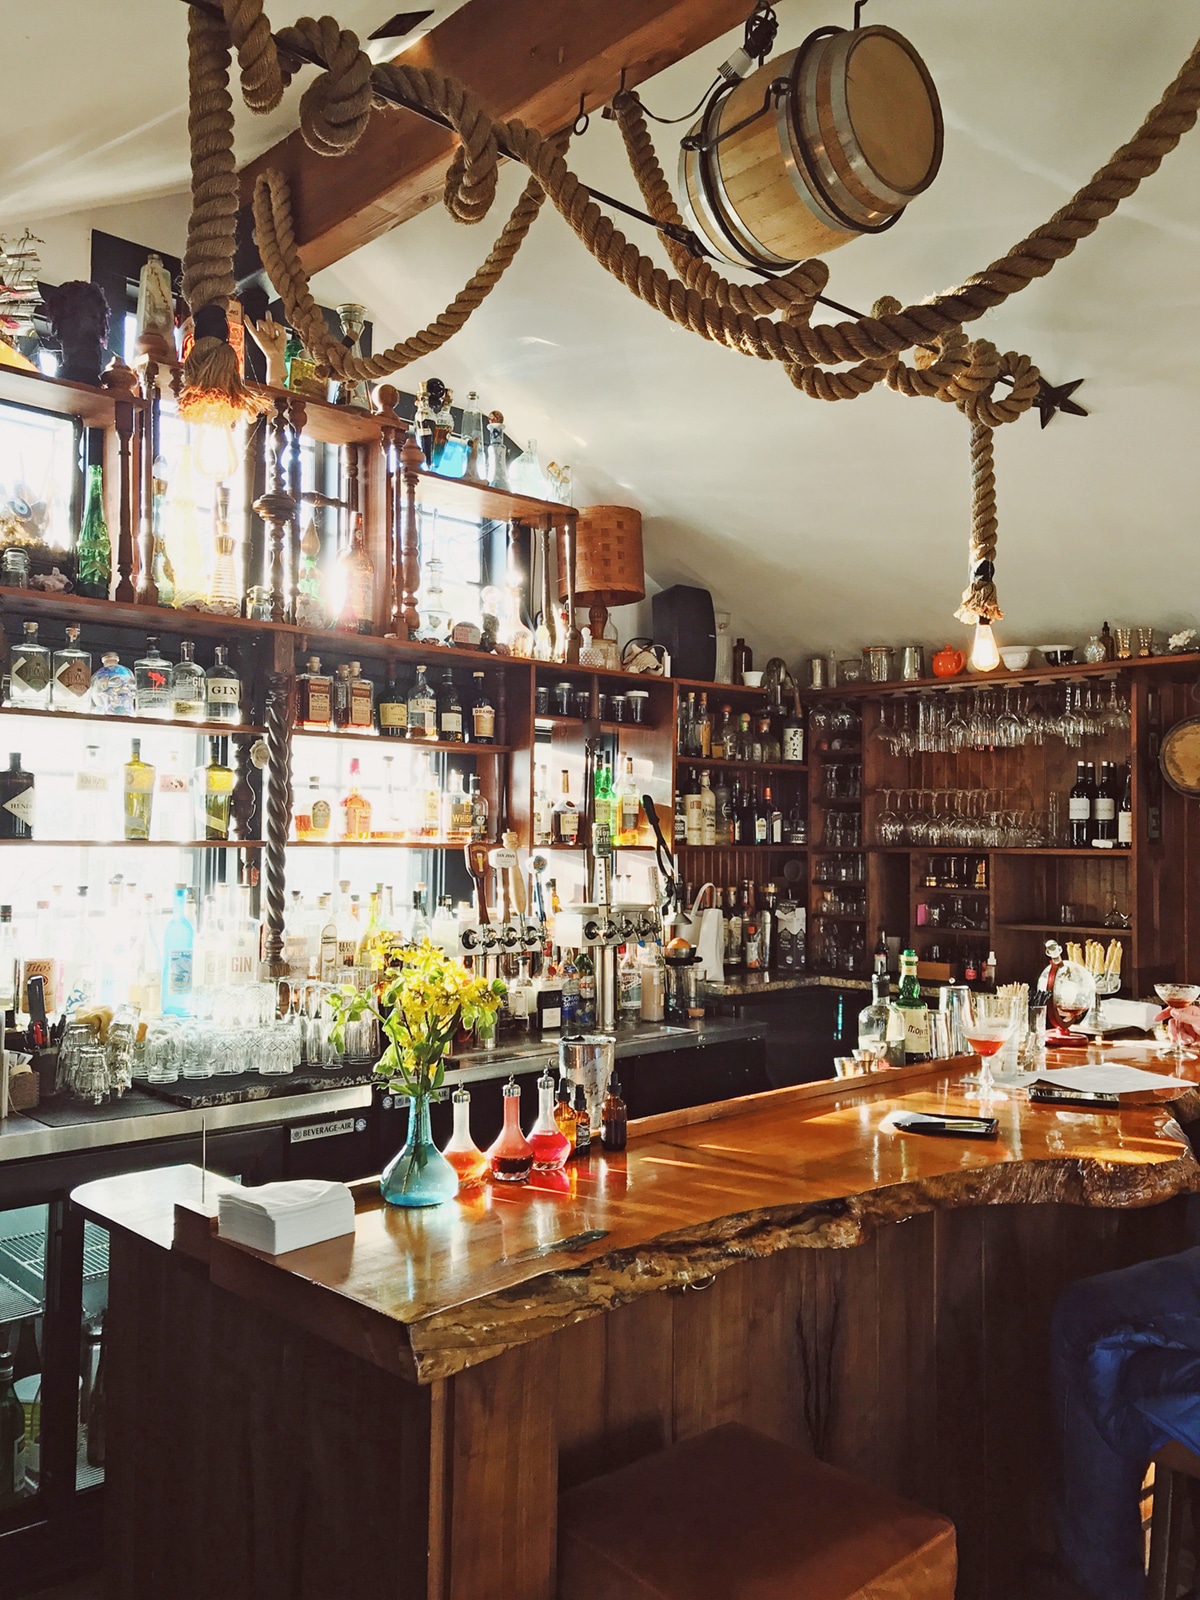 barnicle bar | our favorite places on Orcas Island - travel guide on coco kelley